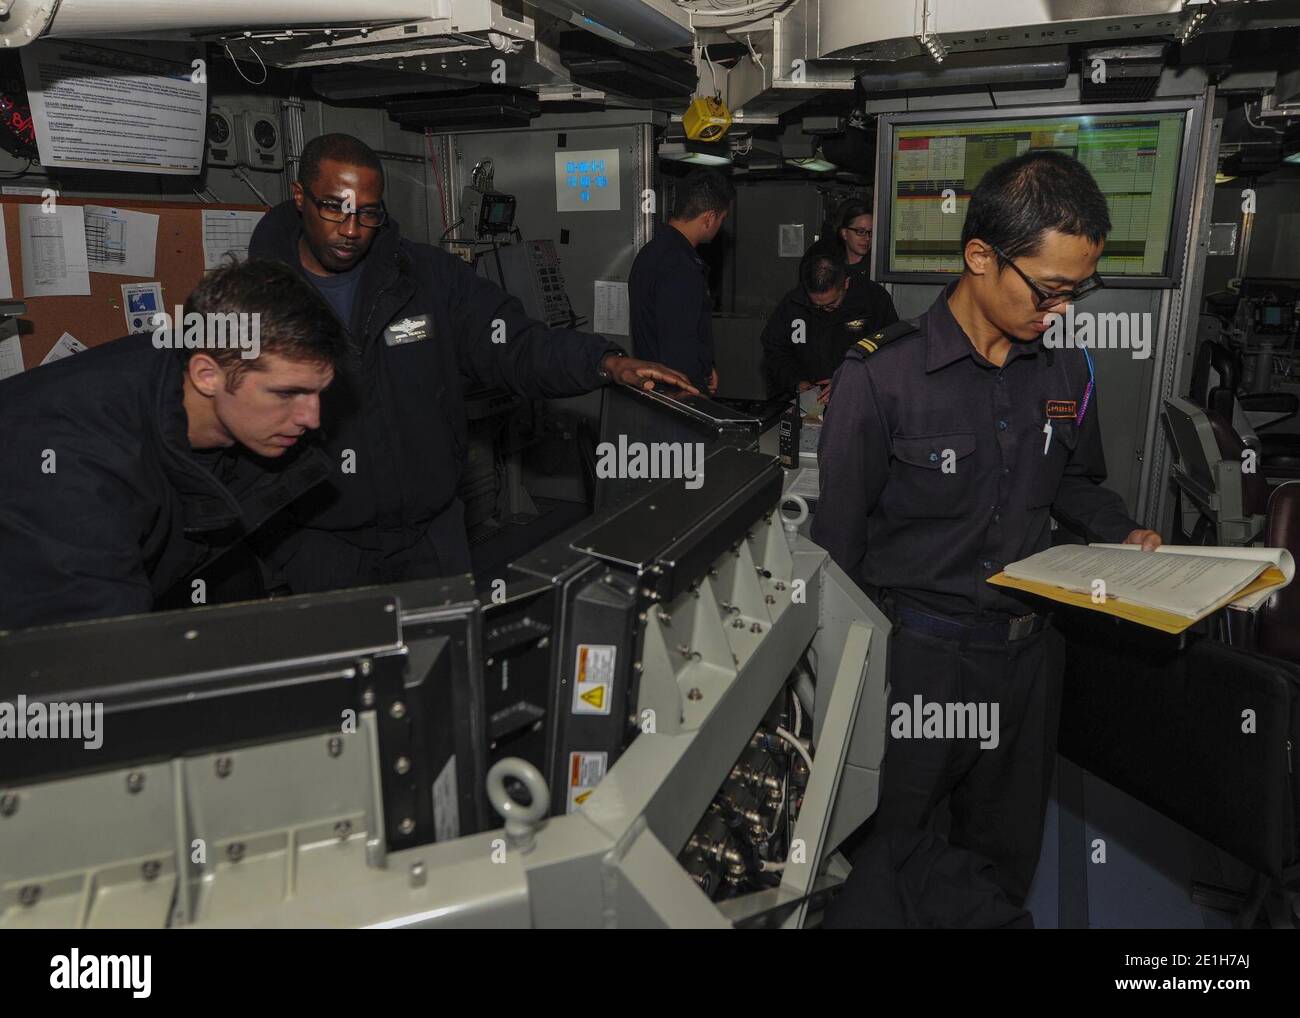 Lt. j.g. Michael Smith, Lt. Jamal Headen, and Lt. j.g. Hideaki Shimababa observe operations from the Sea Combat Commander Operations Center. Stock Photo